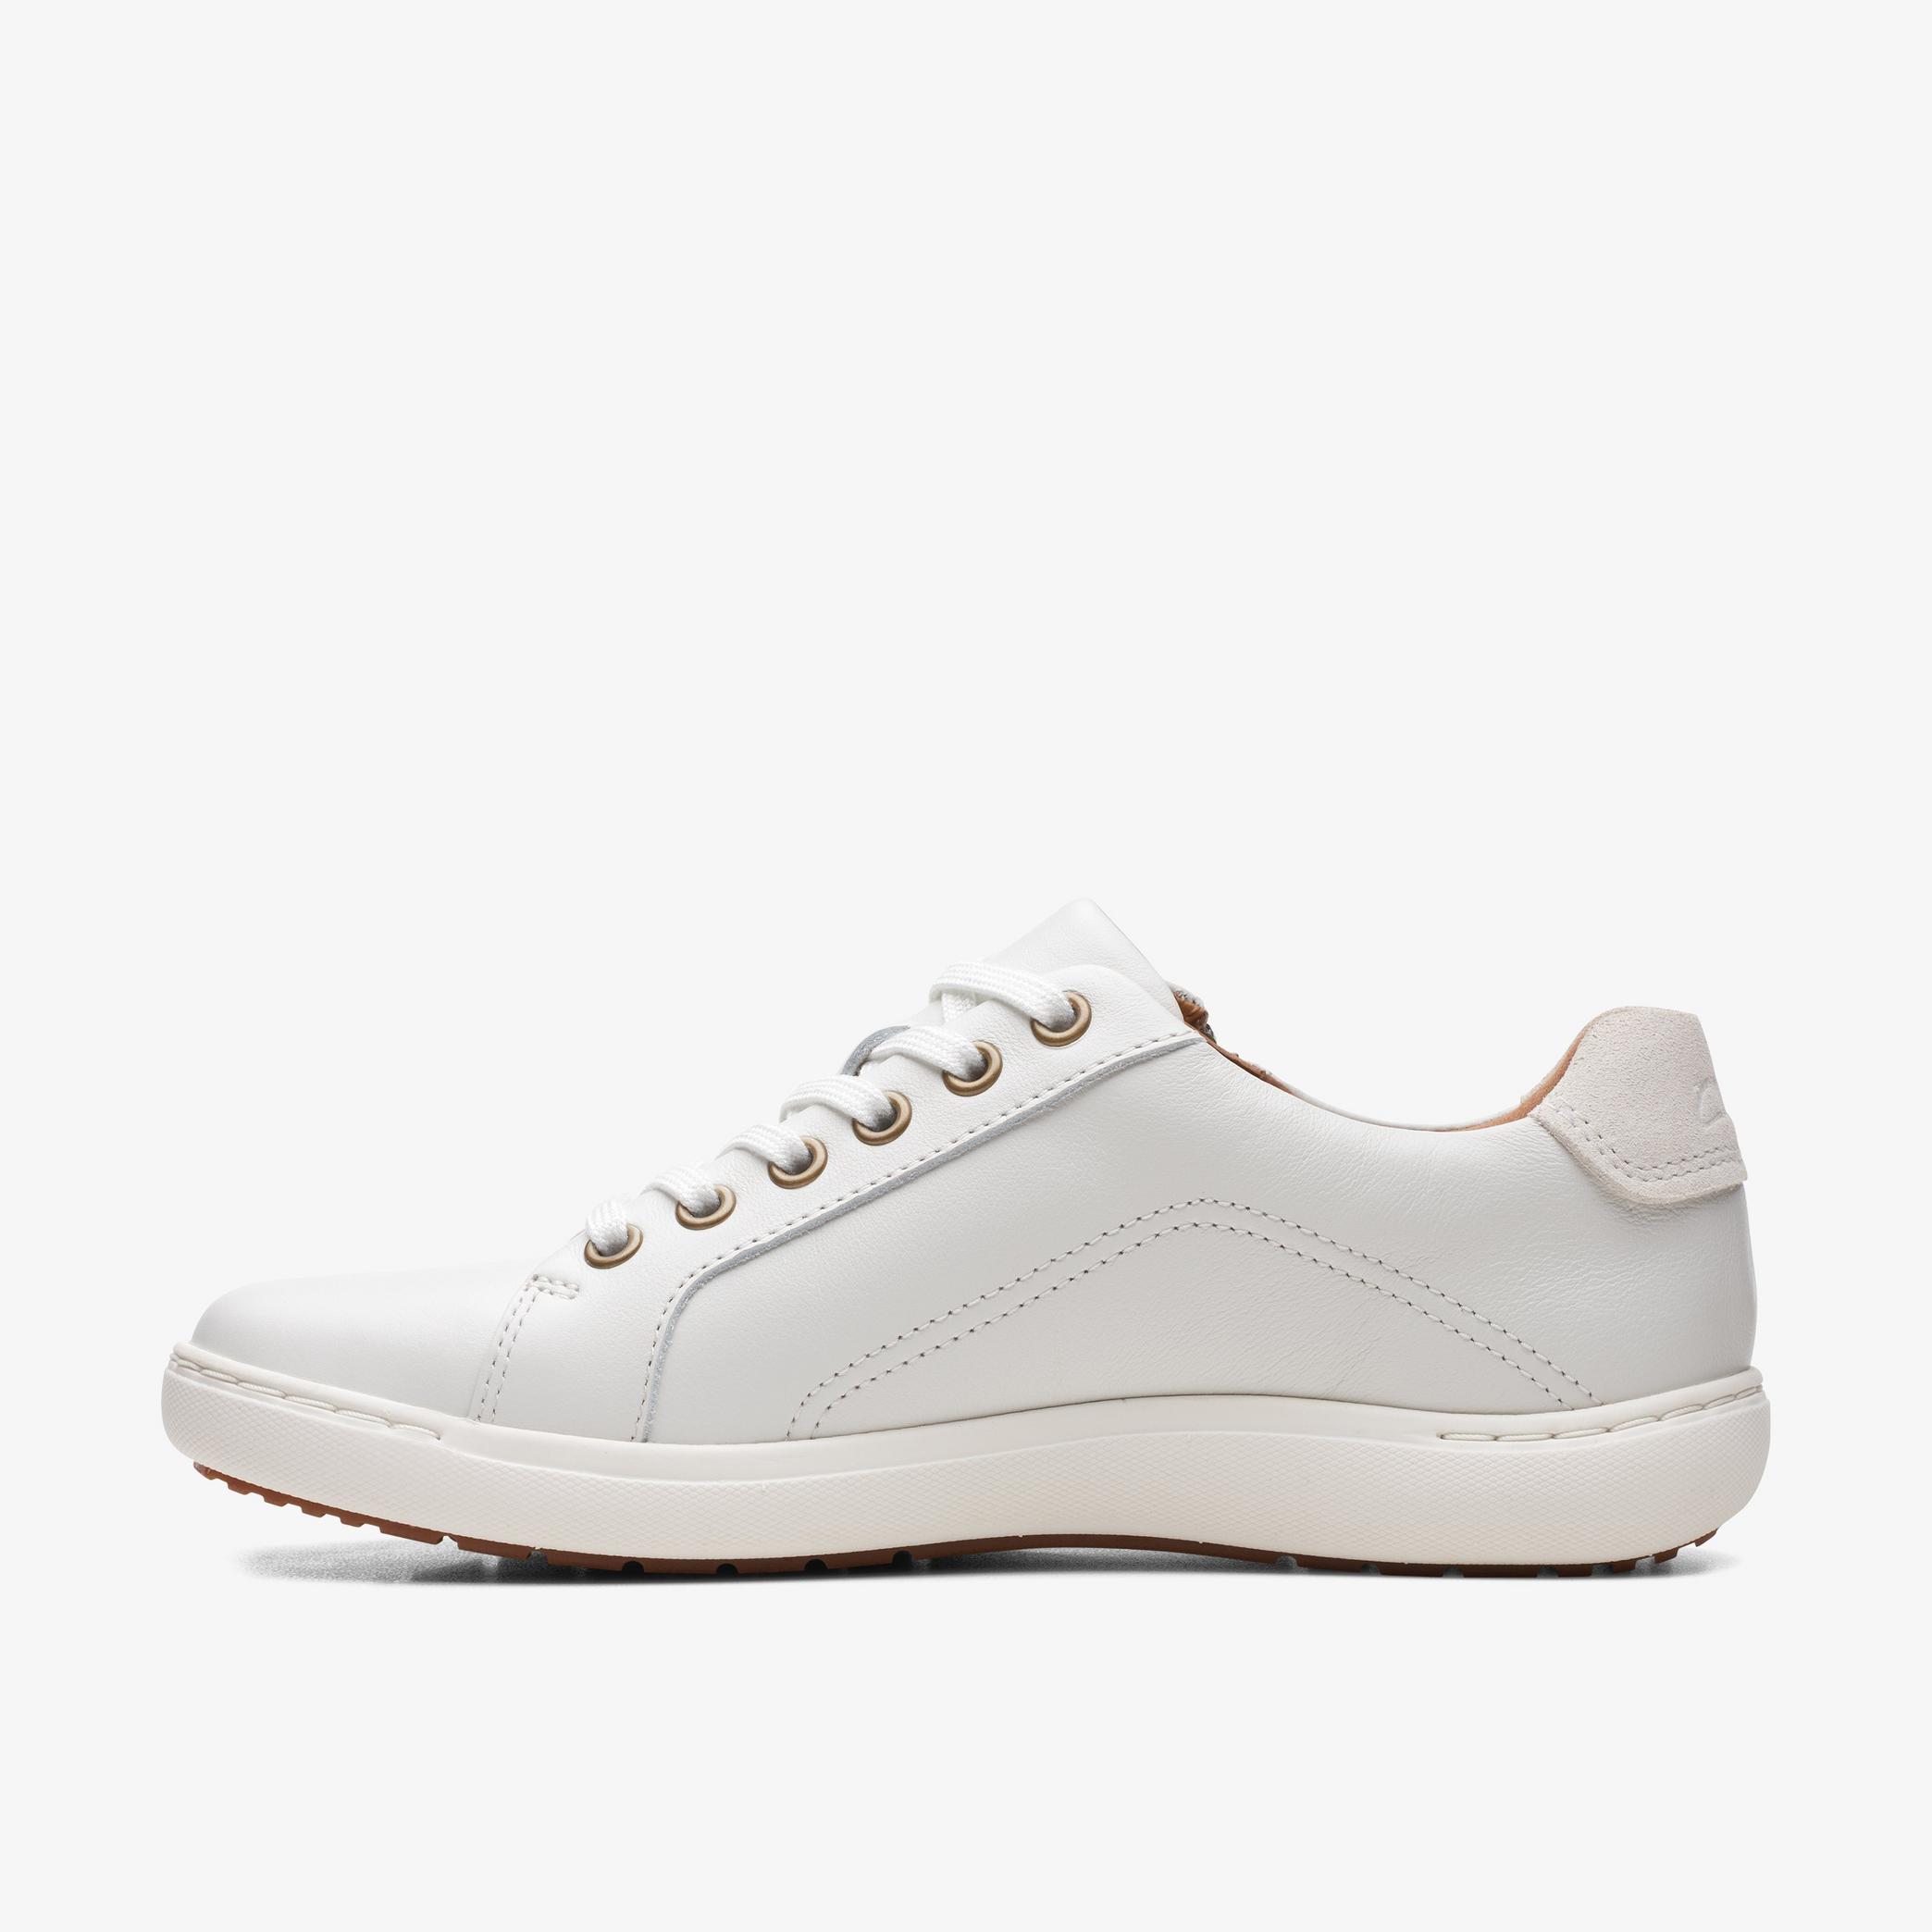 WOMENS Nalle Lace White Leather Sneakers | Clarks US